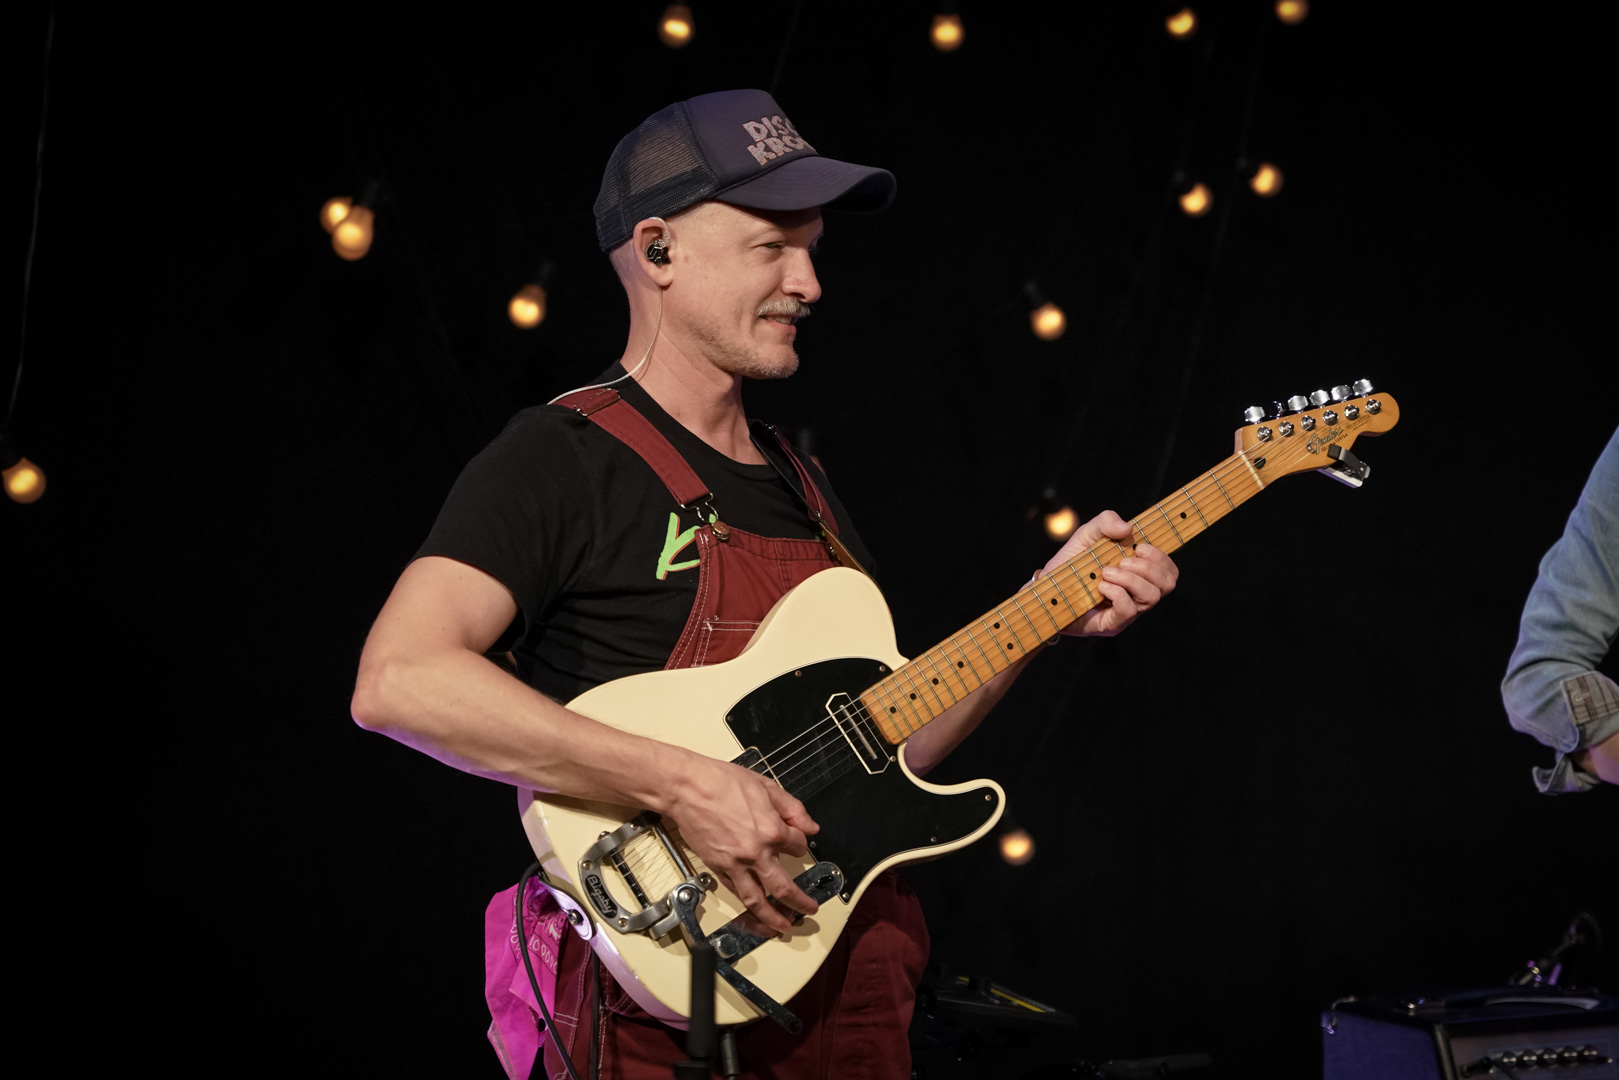 A guitarist with a telecaster